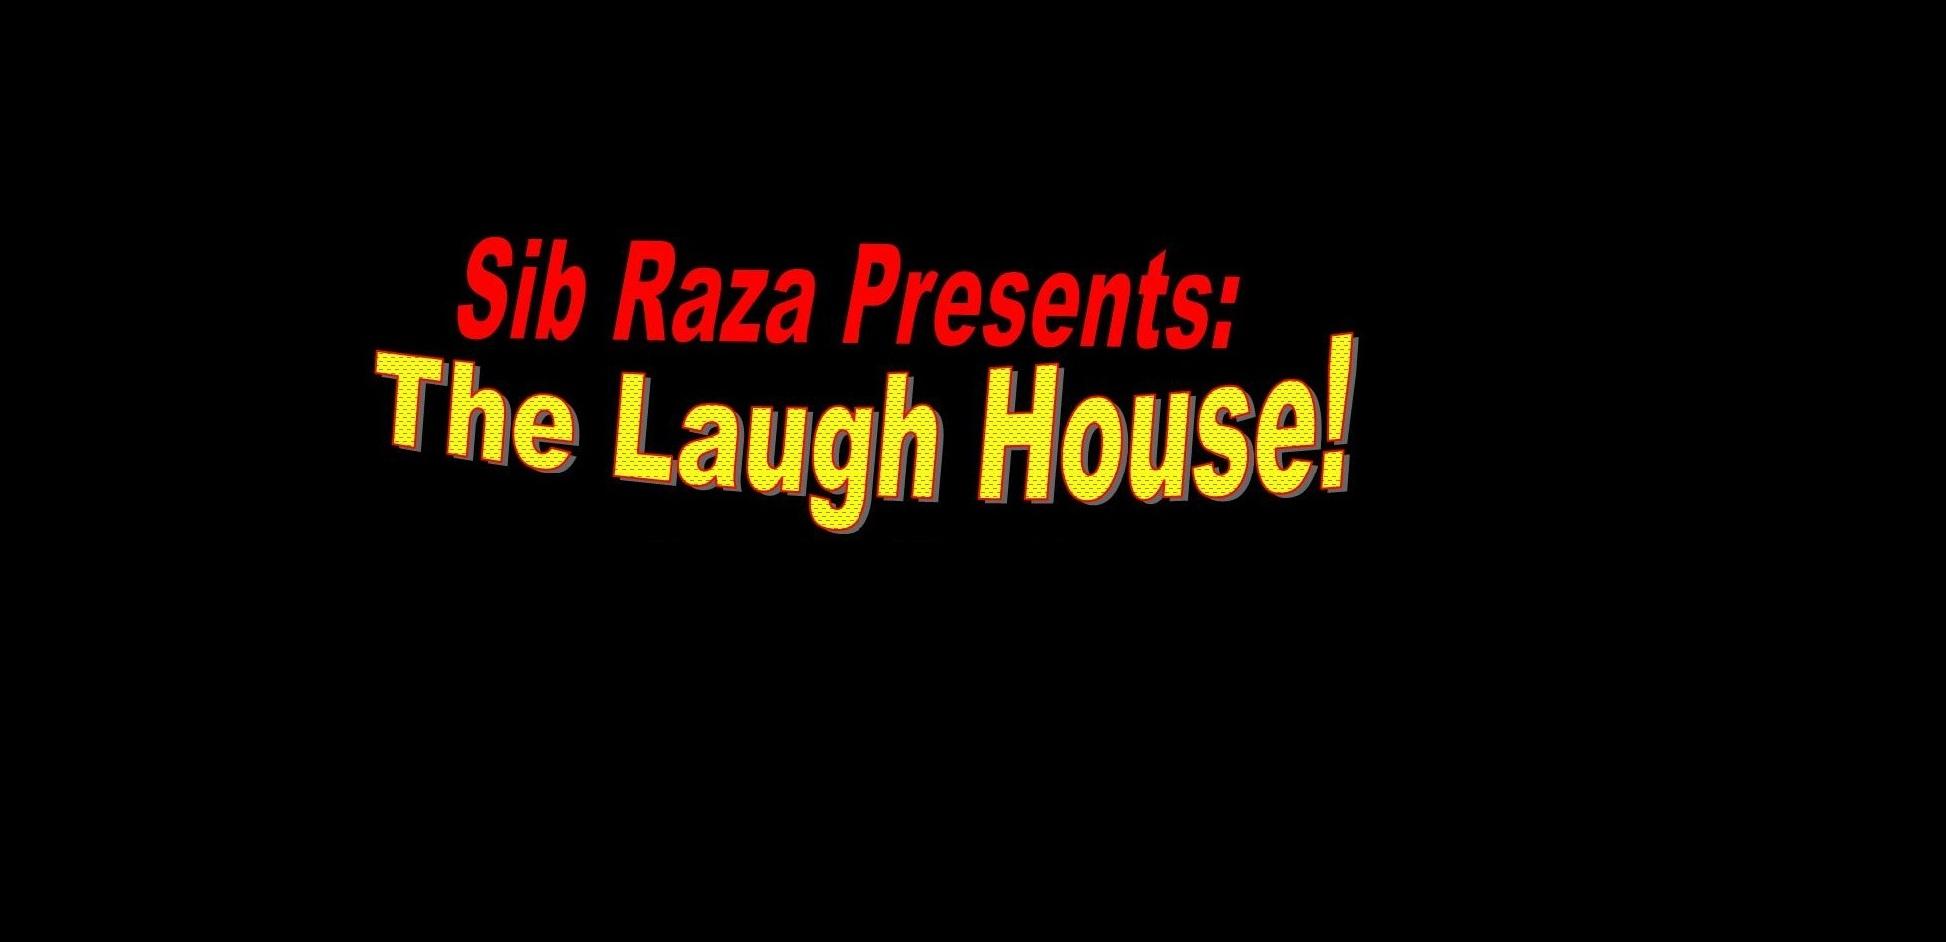 FREE: The Laugh House Comedy Show